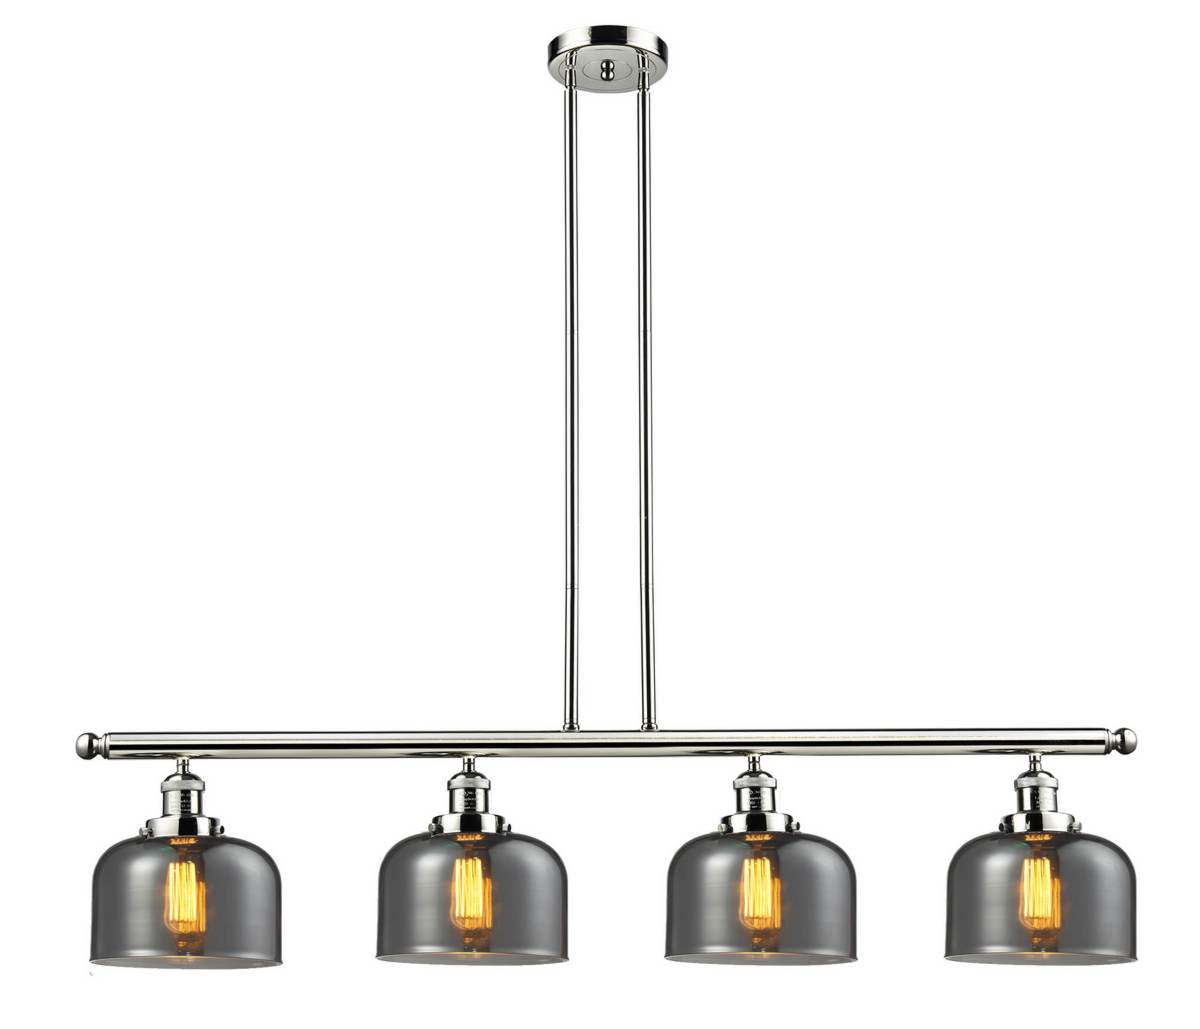 214-PN-G73 4-Light 52.625" Polished Nickel Island Light - Plated Smoke Large Bell Glass - LED Bulb - Dimmensions: 52.625 x 8 x 10<br>Minimum Height : 20<br>Maximum Height : 44 - Sloped Ceiling Compatible: Yes